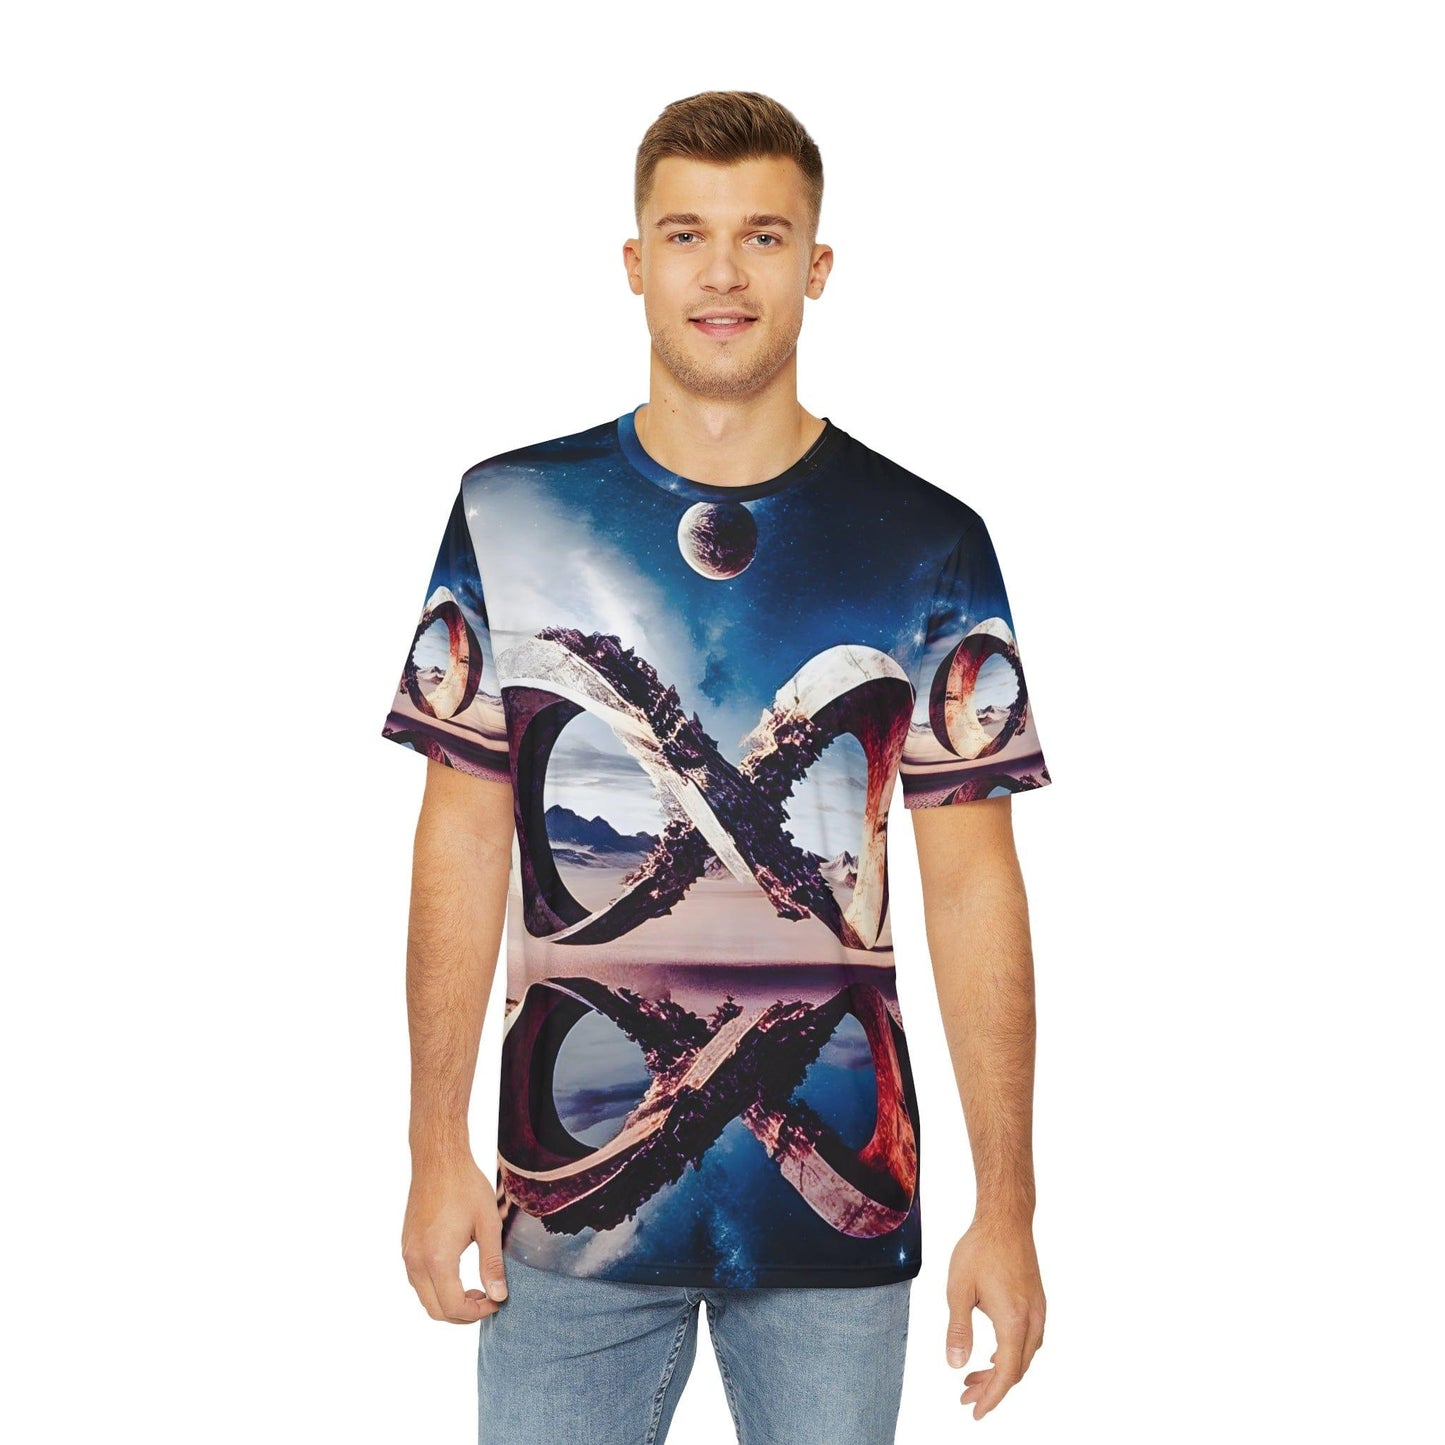 Surreal Infinite Possibilities - All Over Print (AOP) / Sublimation Design - Digital AI Art T-Shirt for Street or Festival Wear - Alchemystics.org